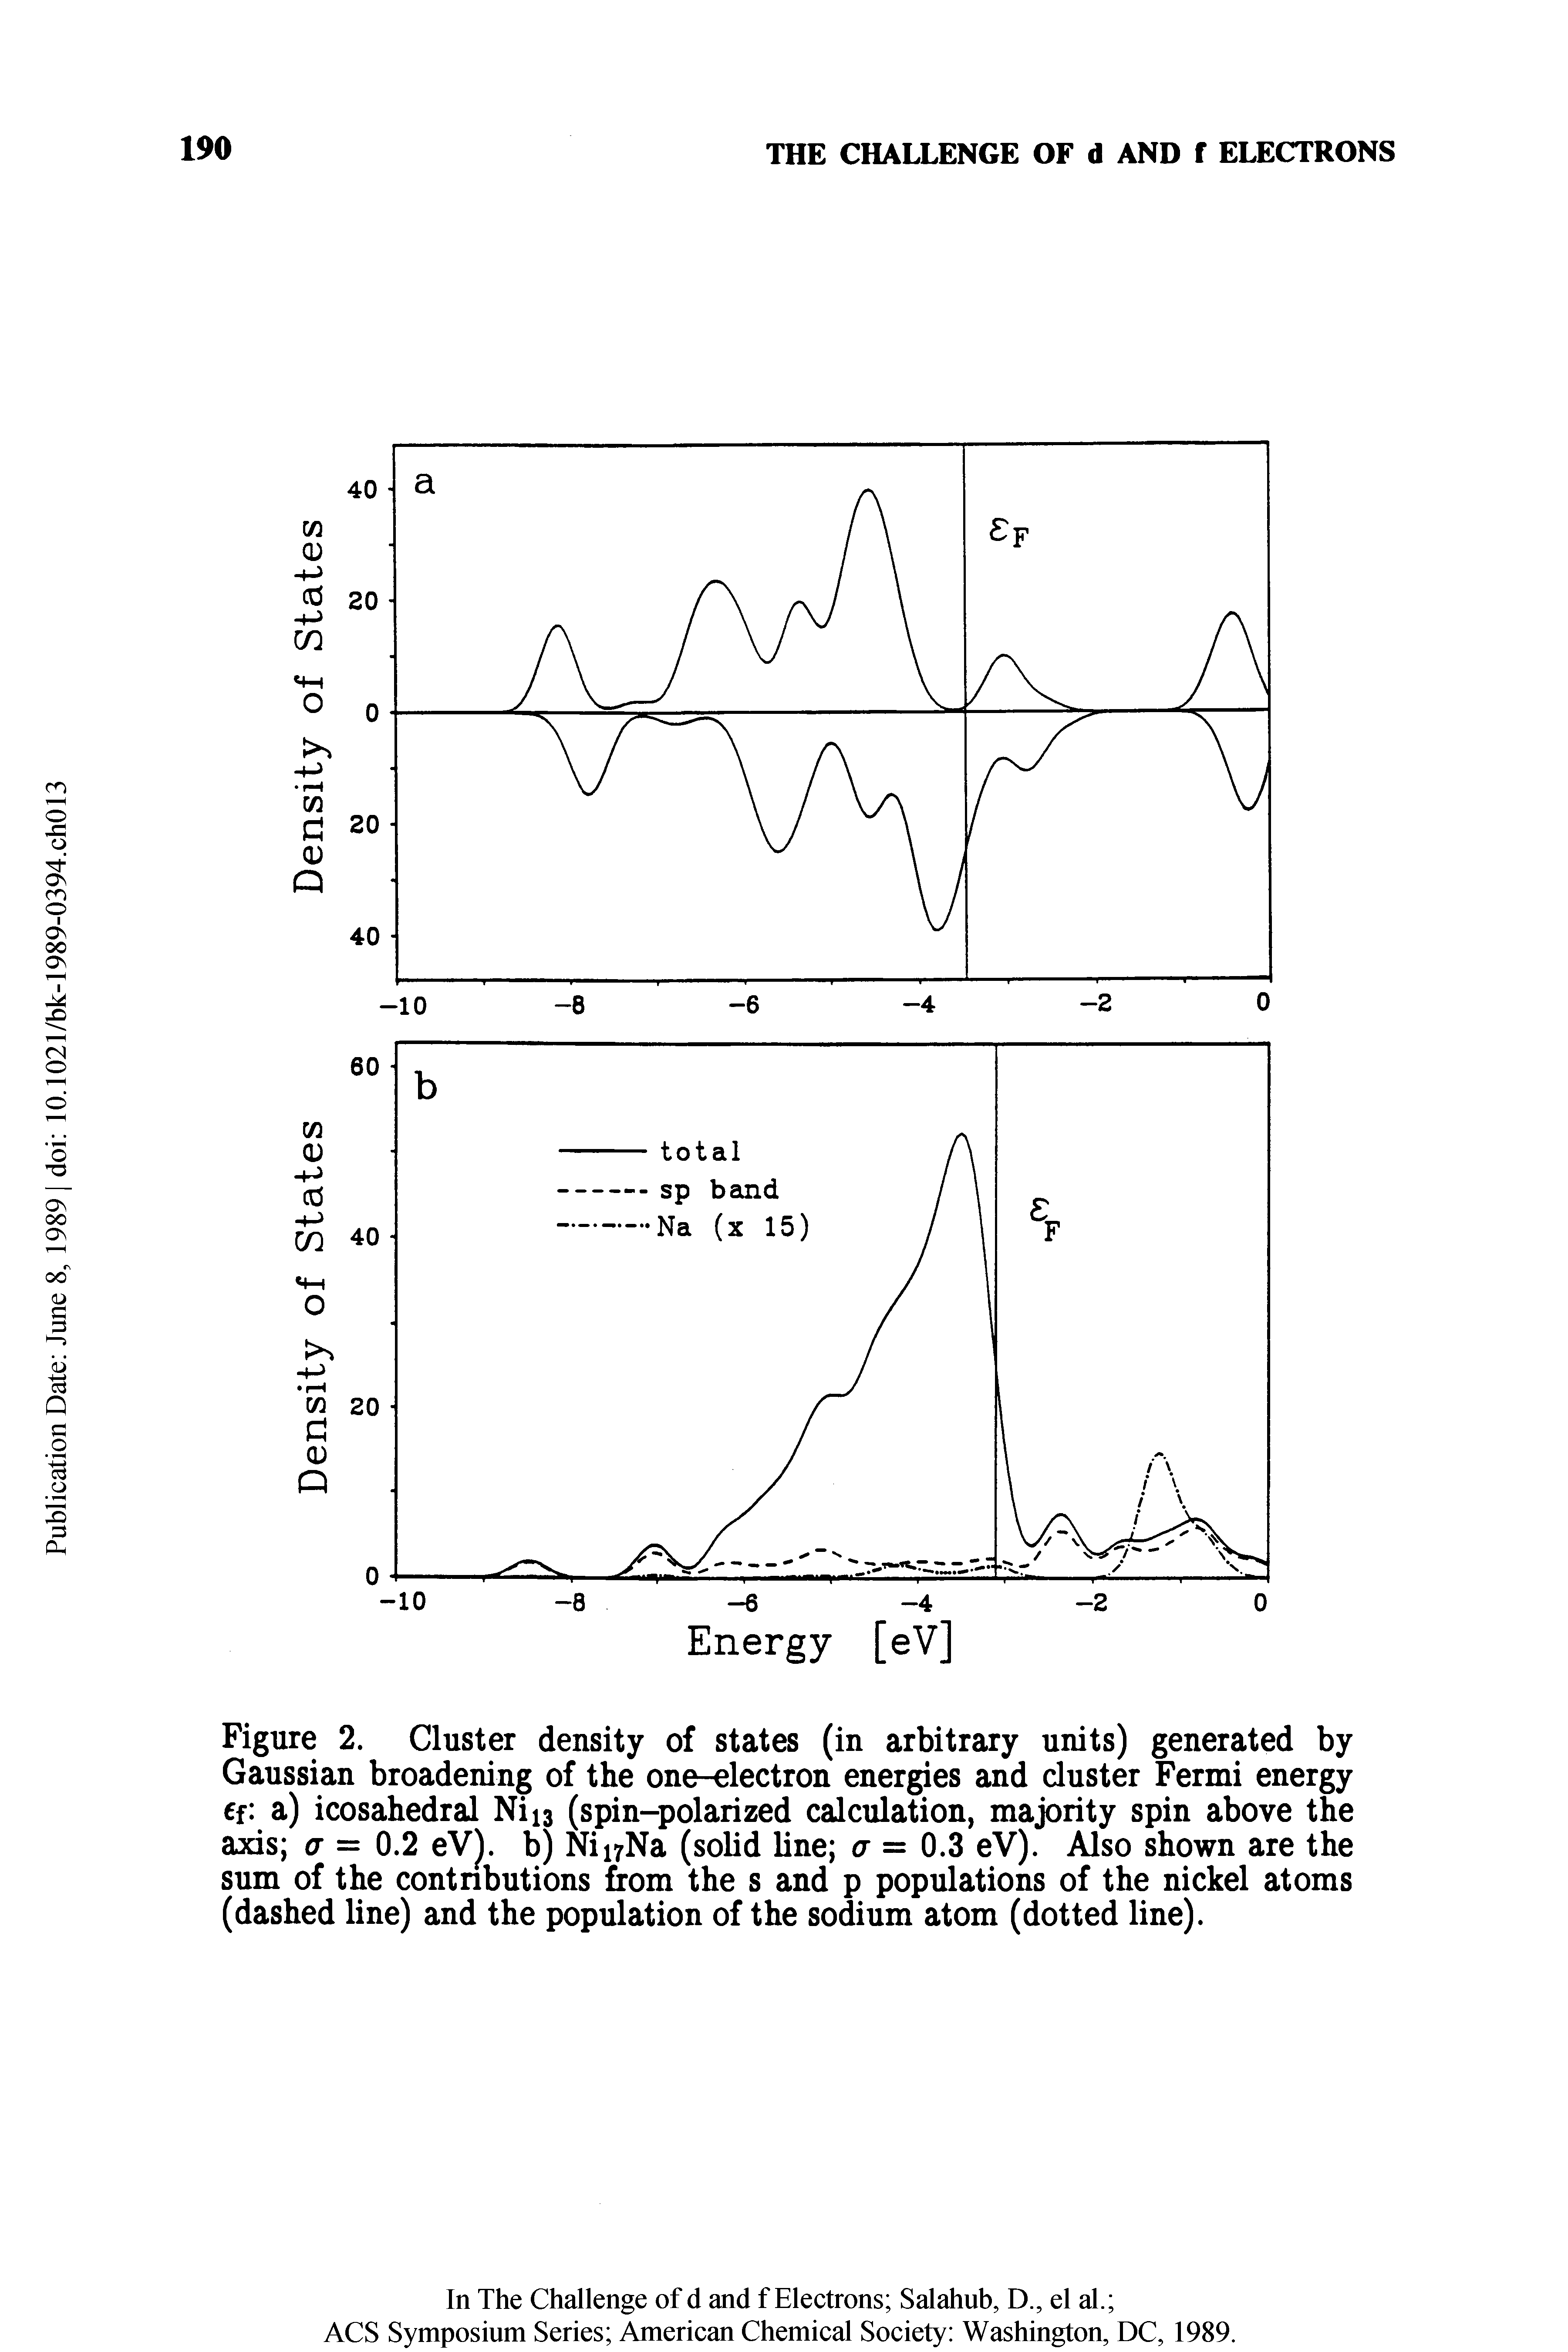 Figure 2. Cluster density of states (in arbitrary units) generated by Gaussian broadening of the one-electron energies and cluster Fermi energy Cf a) icosahedral Niia (spin-polarized calculation, majority spin above the axis a = 0.2 eV). b) NiirNa (solid line a = 0.3 eV). Also shown are the sum of the contnbutions from the s and p populations of the nickel atoms (dashed line) and the population of the sodium atom (dotted line).